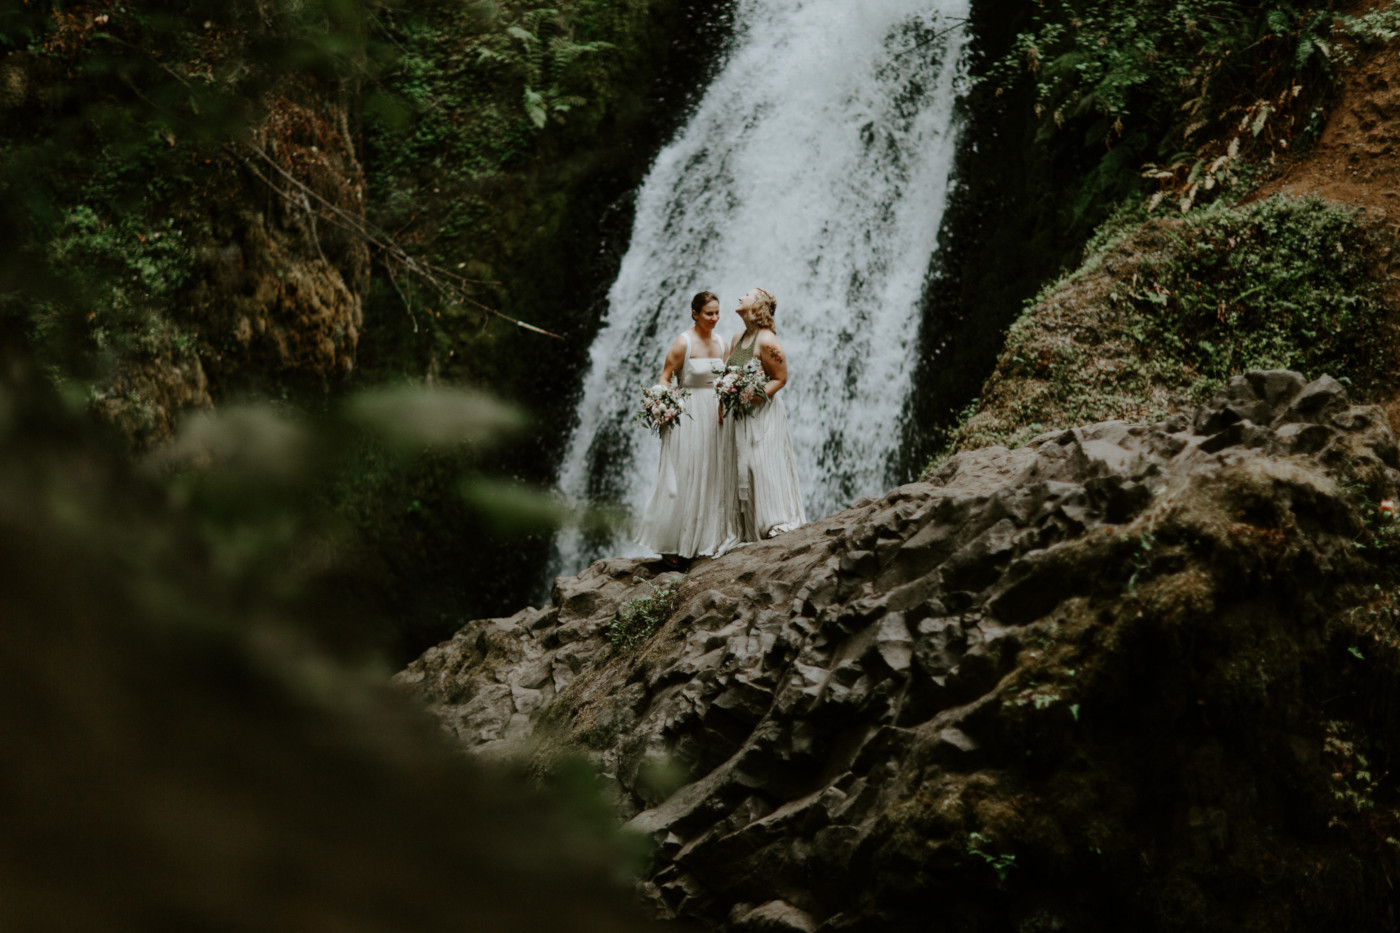 Kate and Audrey stand together in front of Bridal Veil Falls. Elopement wedding photography at Bridal Veil Falls by Sienna Plus Josh.